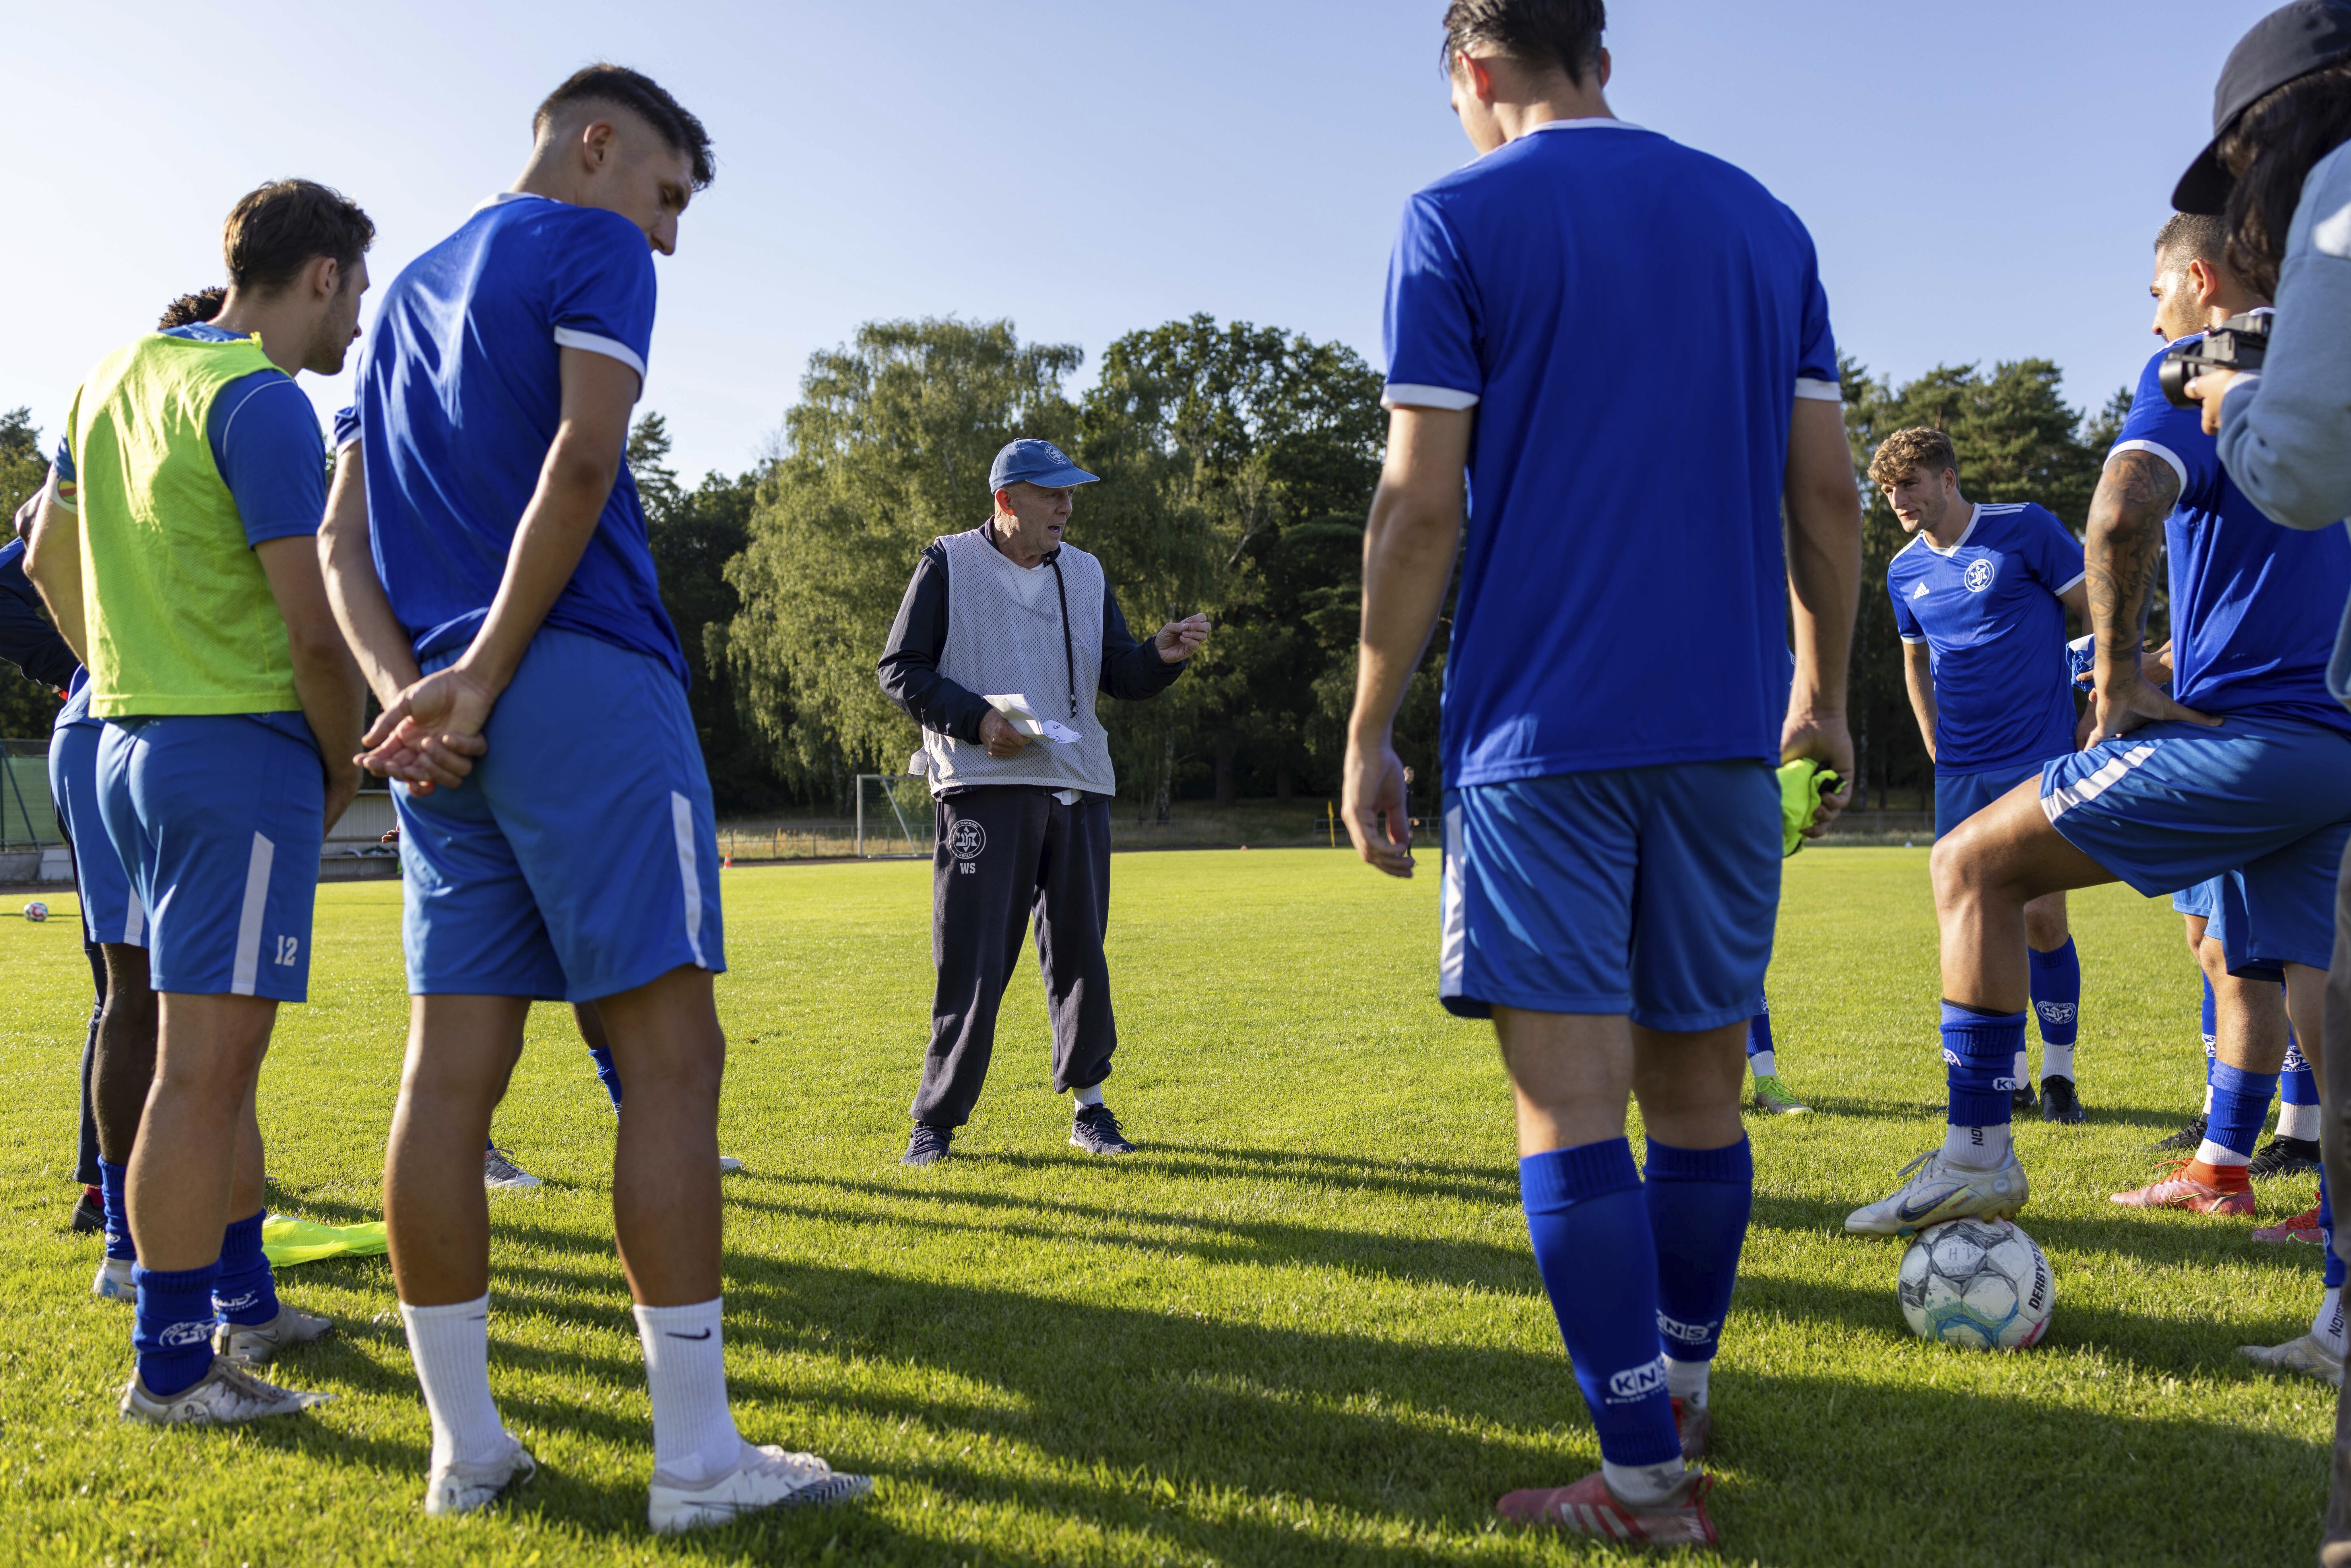 Makkabi Berlin coach Wolfgang Sandhowe instructs his players before a practice match, in Berlin, Wednesday, July 26, 2023. When Makkabi Berlin takes the field on Sunday Aug. 13, 2023, the soccer club founded by Holocaust survivors will become the first Jewish team to play in the German Cup. (AP Photo/Ciaran Fahey)